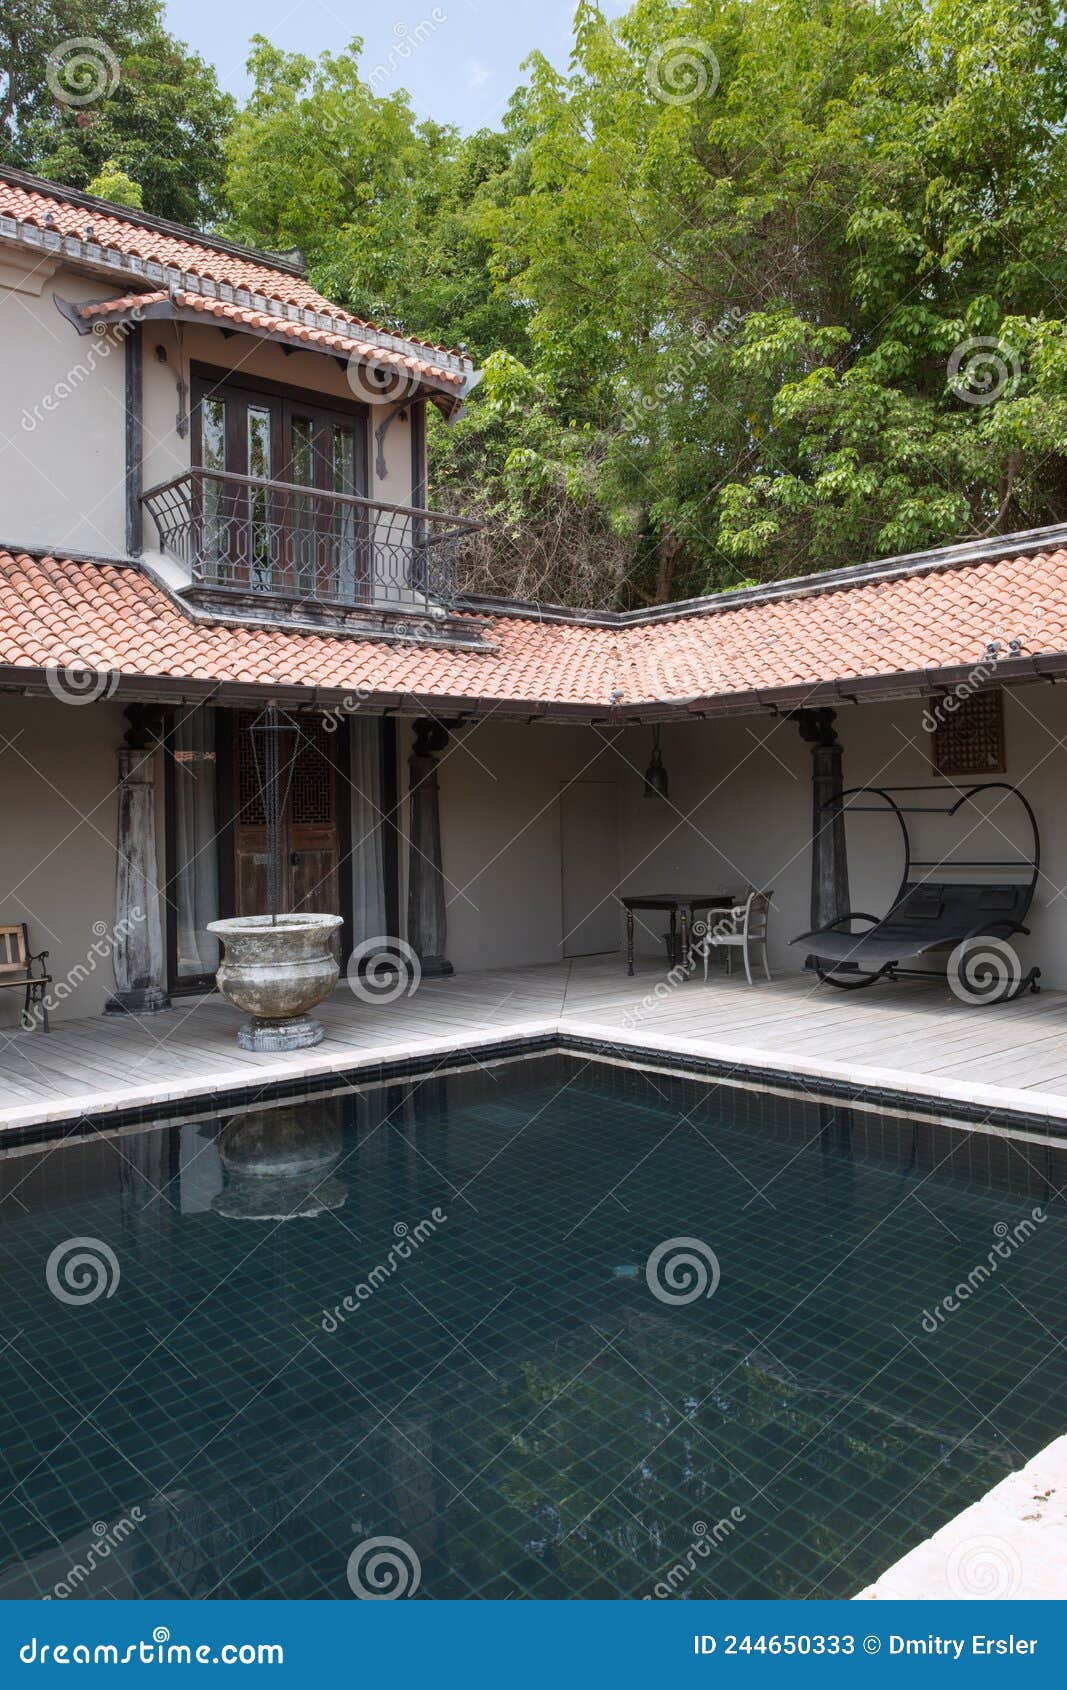 with swimming pool in the middle